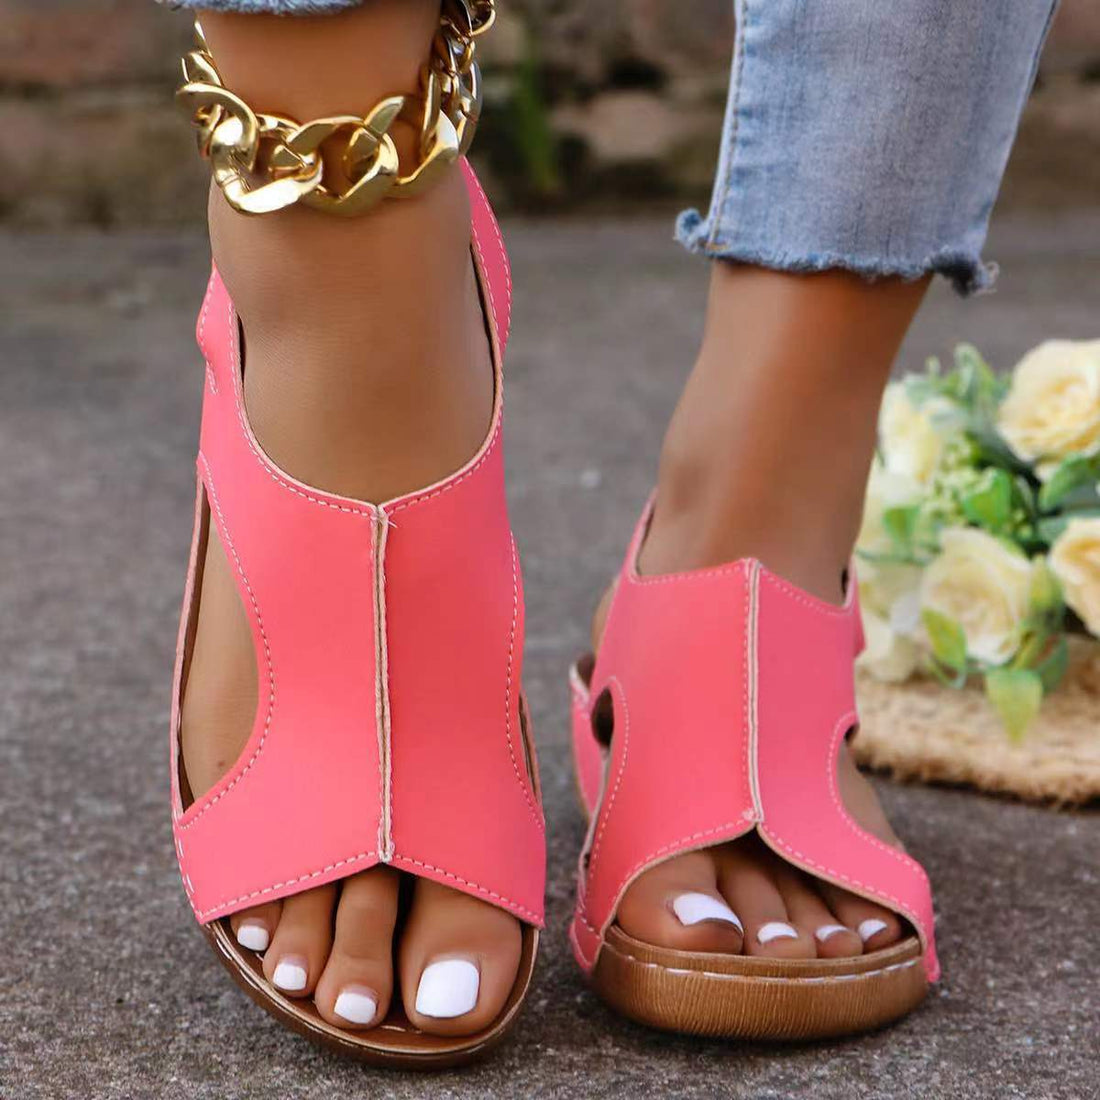 New Summer Wedges Sandals With Elastic Band Design Casual Fish Mouth Shoes For Women